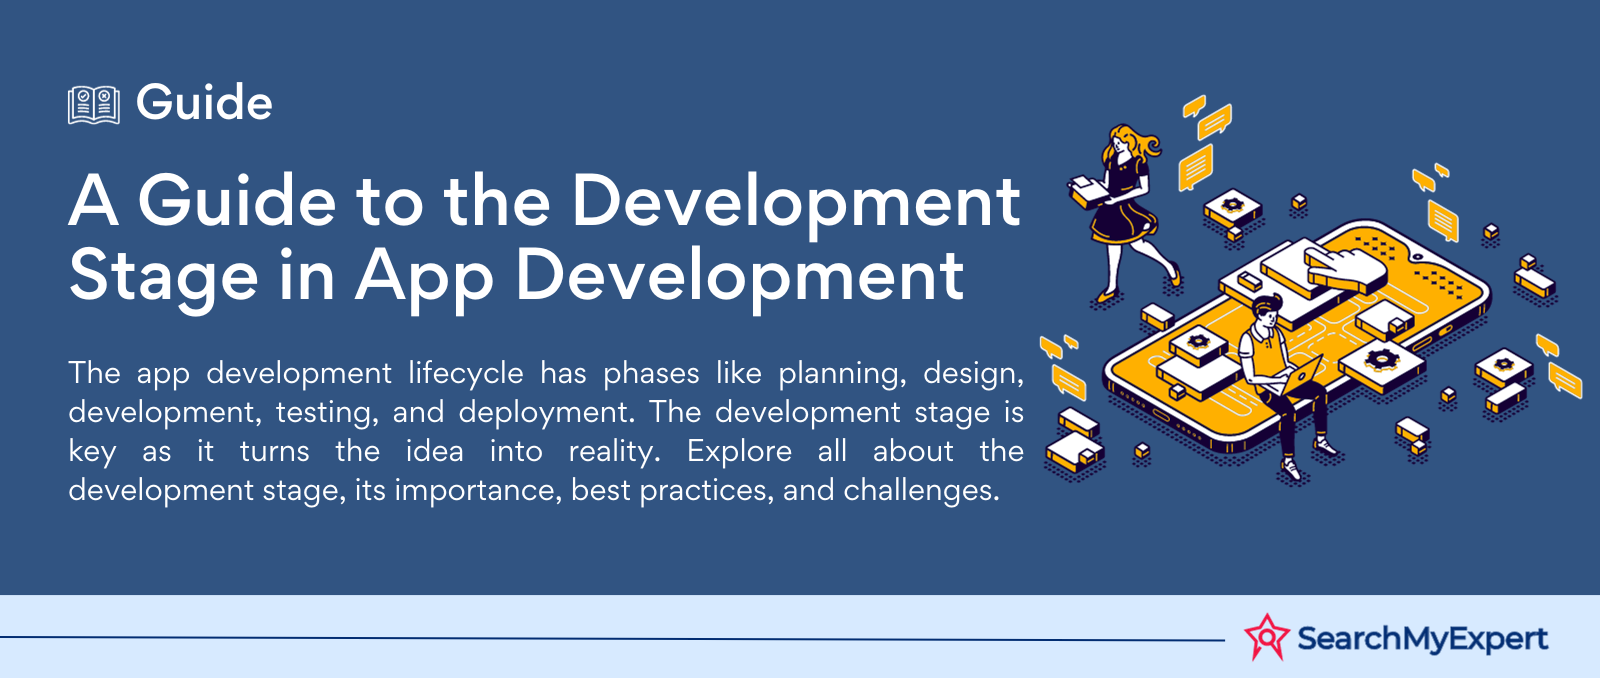 A Guide to the Development Stage in App Development